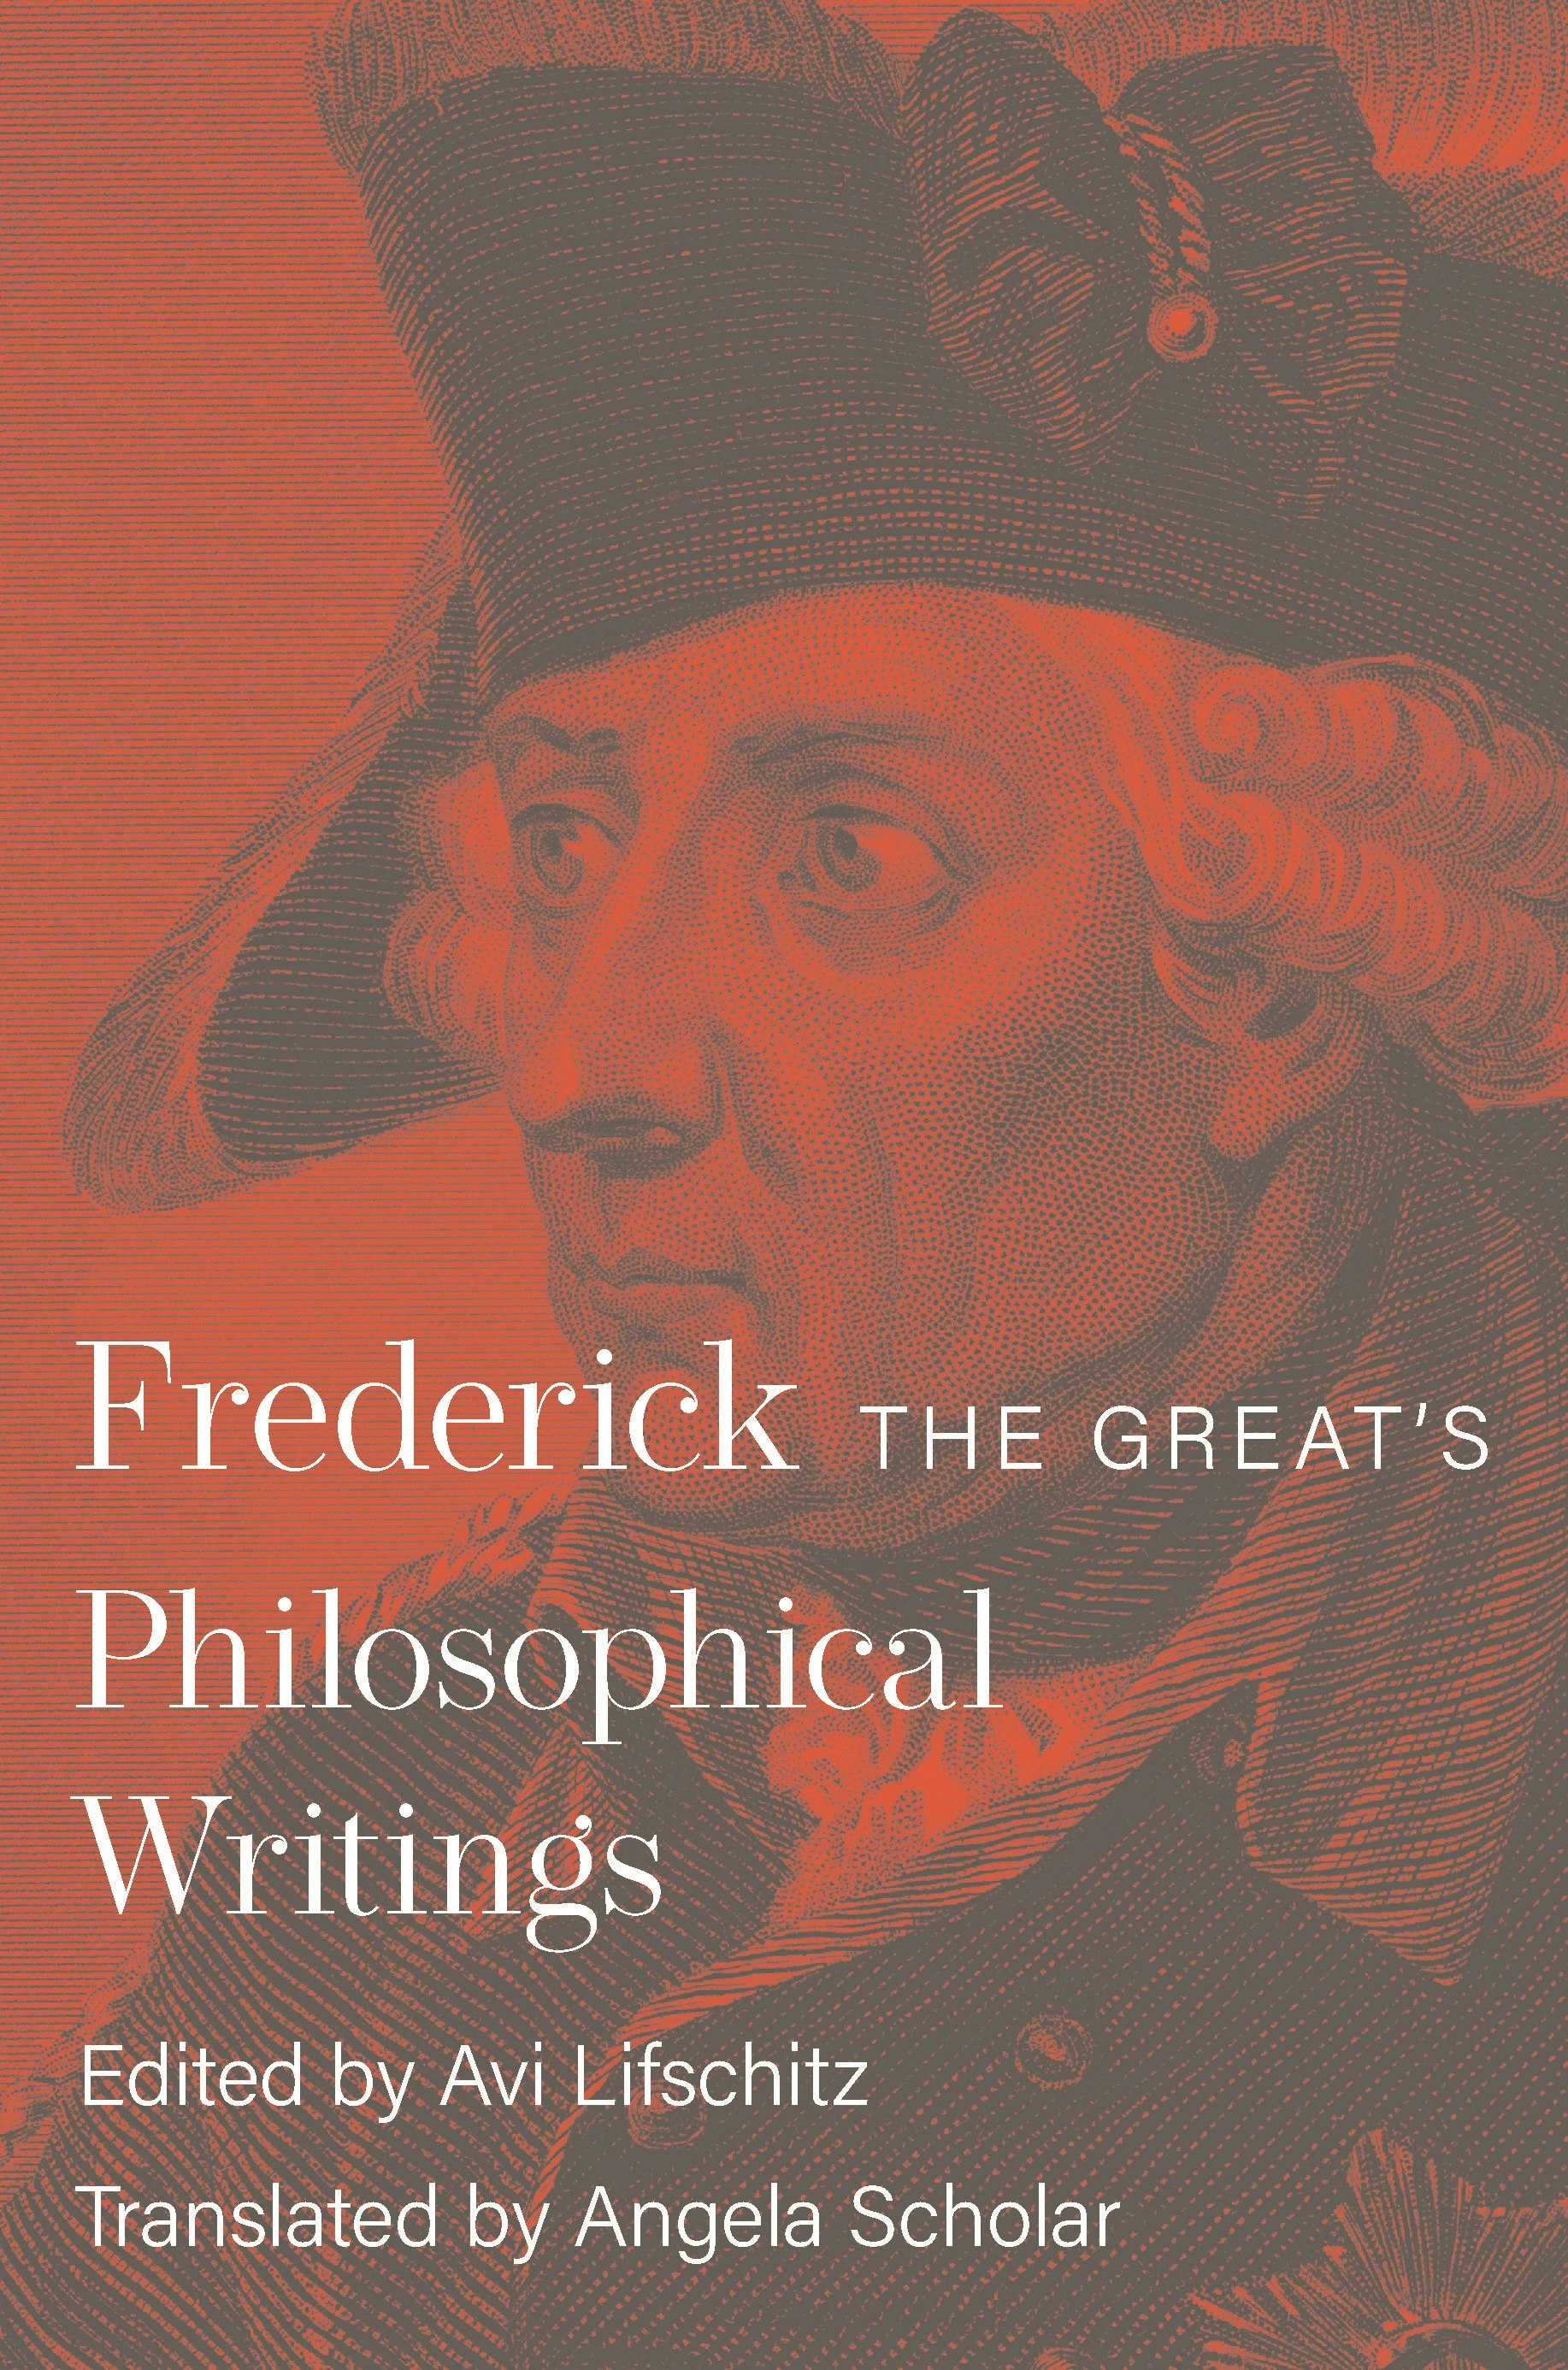 University　the　Princeton　Frederick　Writings　Philosophical　Great's　Press